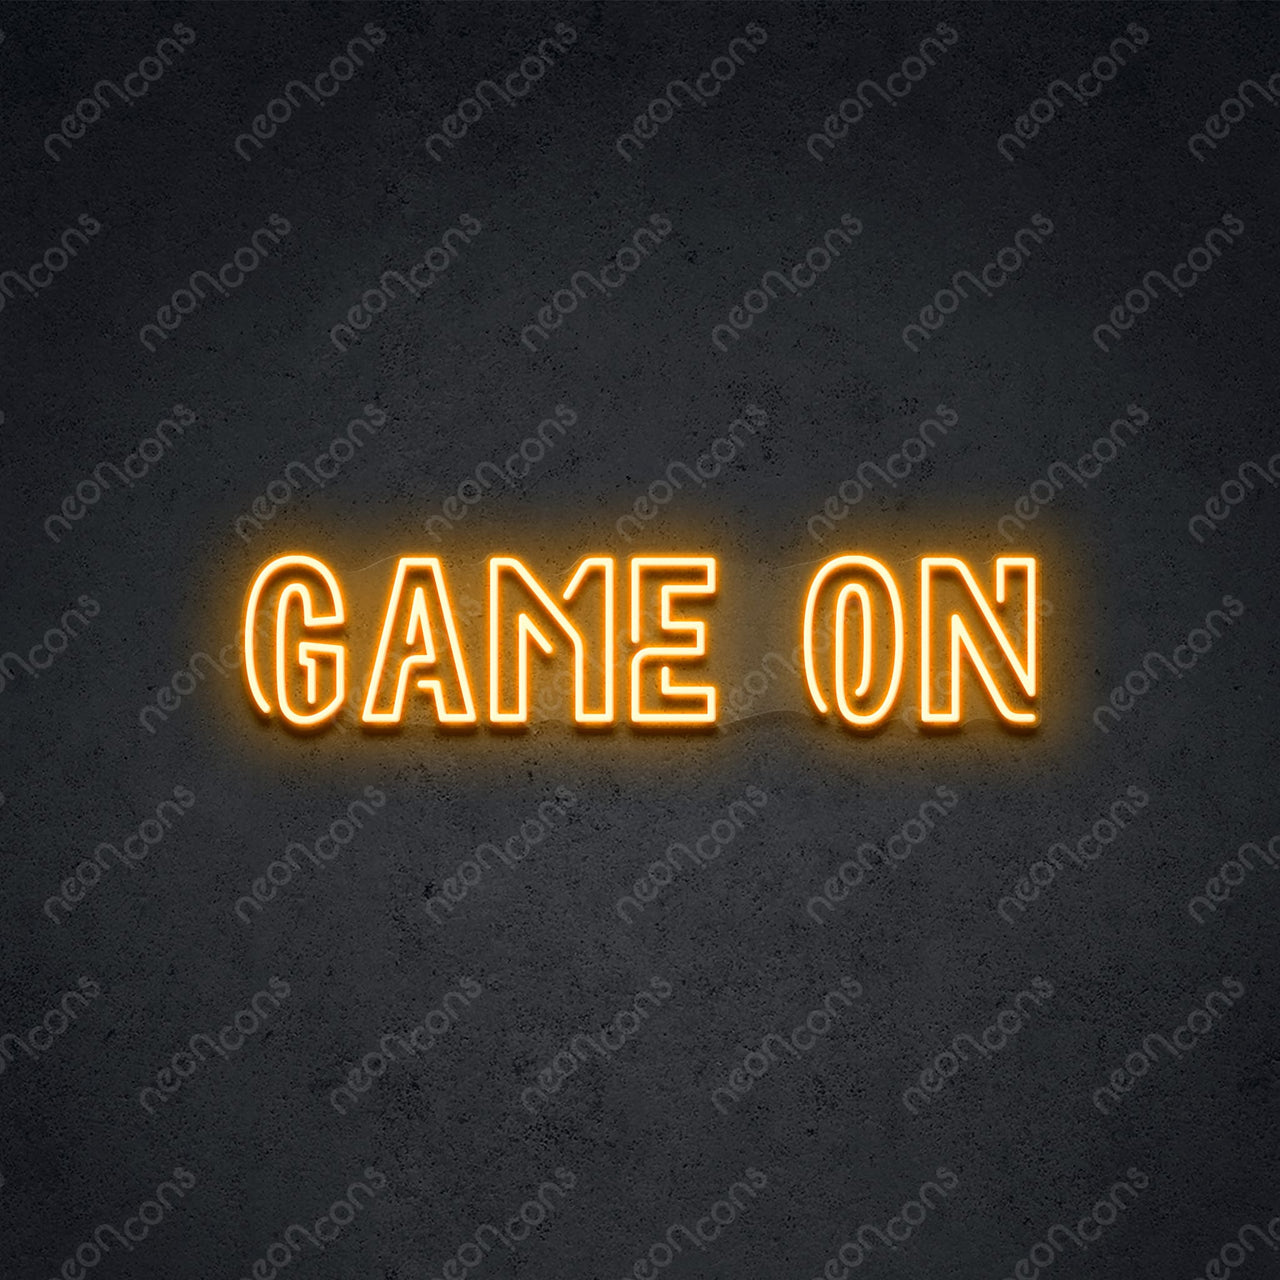 "Game On" Neon Sign 2ft x 0.55ft / Orange / LED Neon by Neon Icons